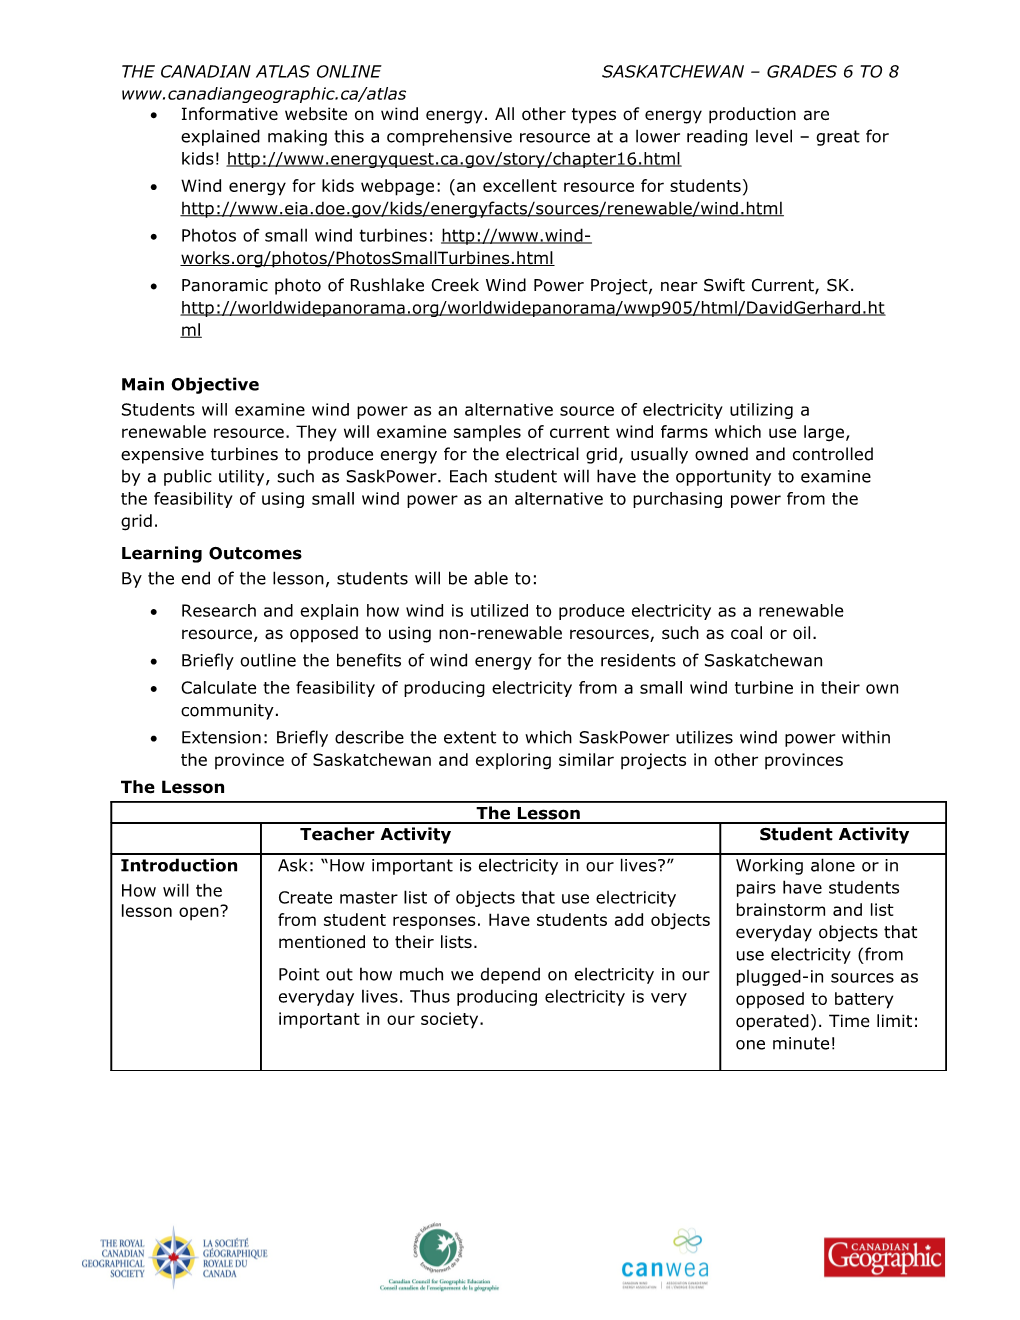 Lesson Plan Template s27